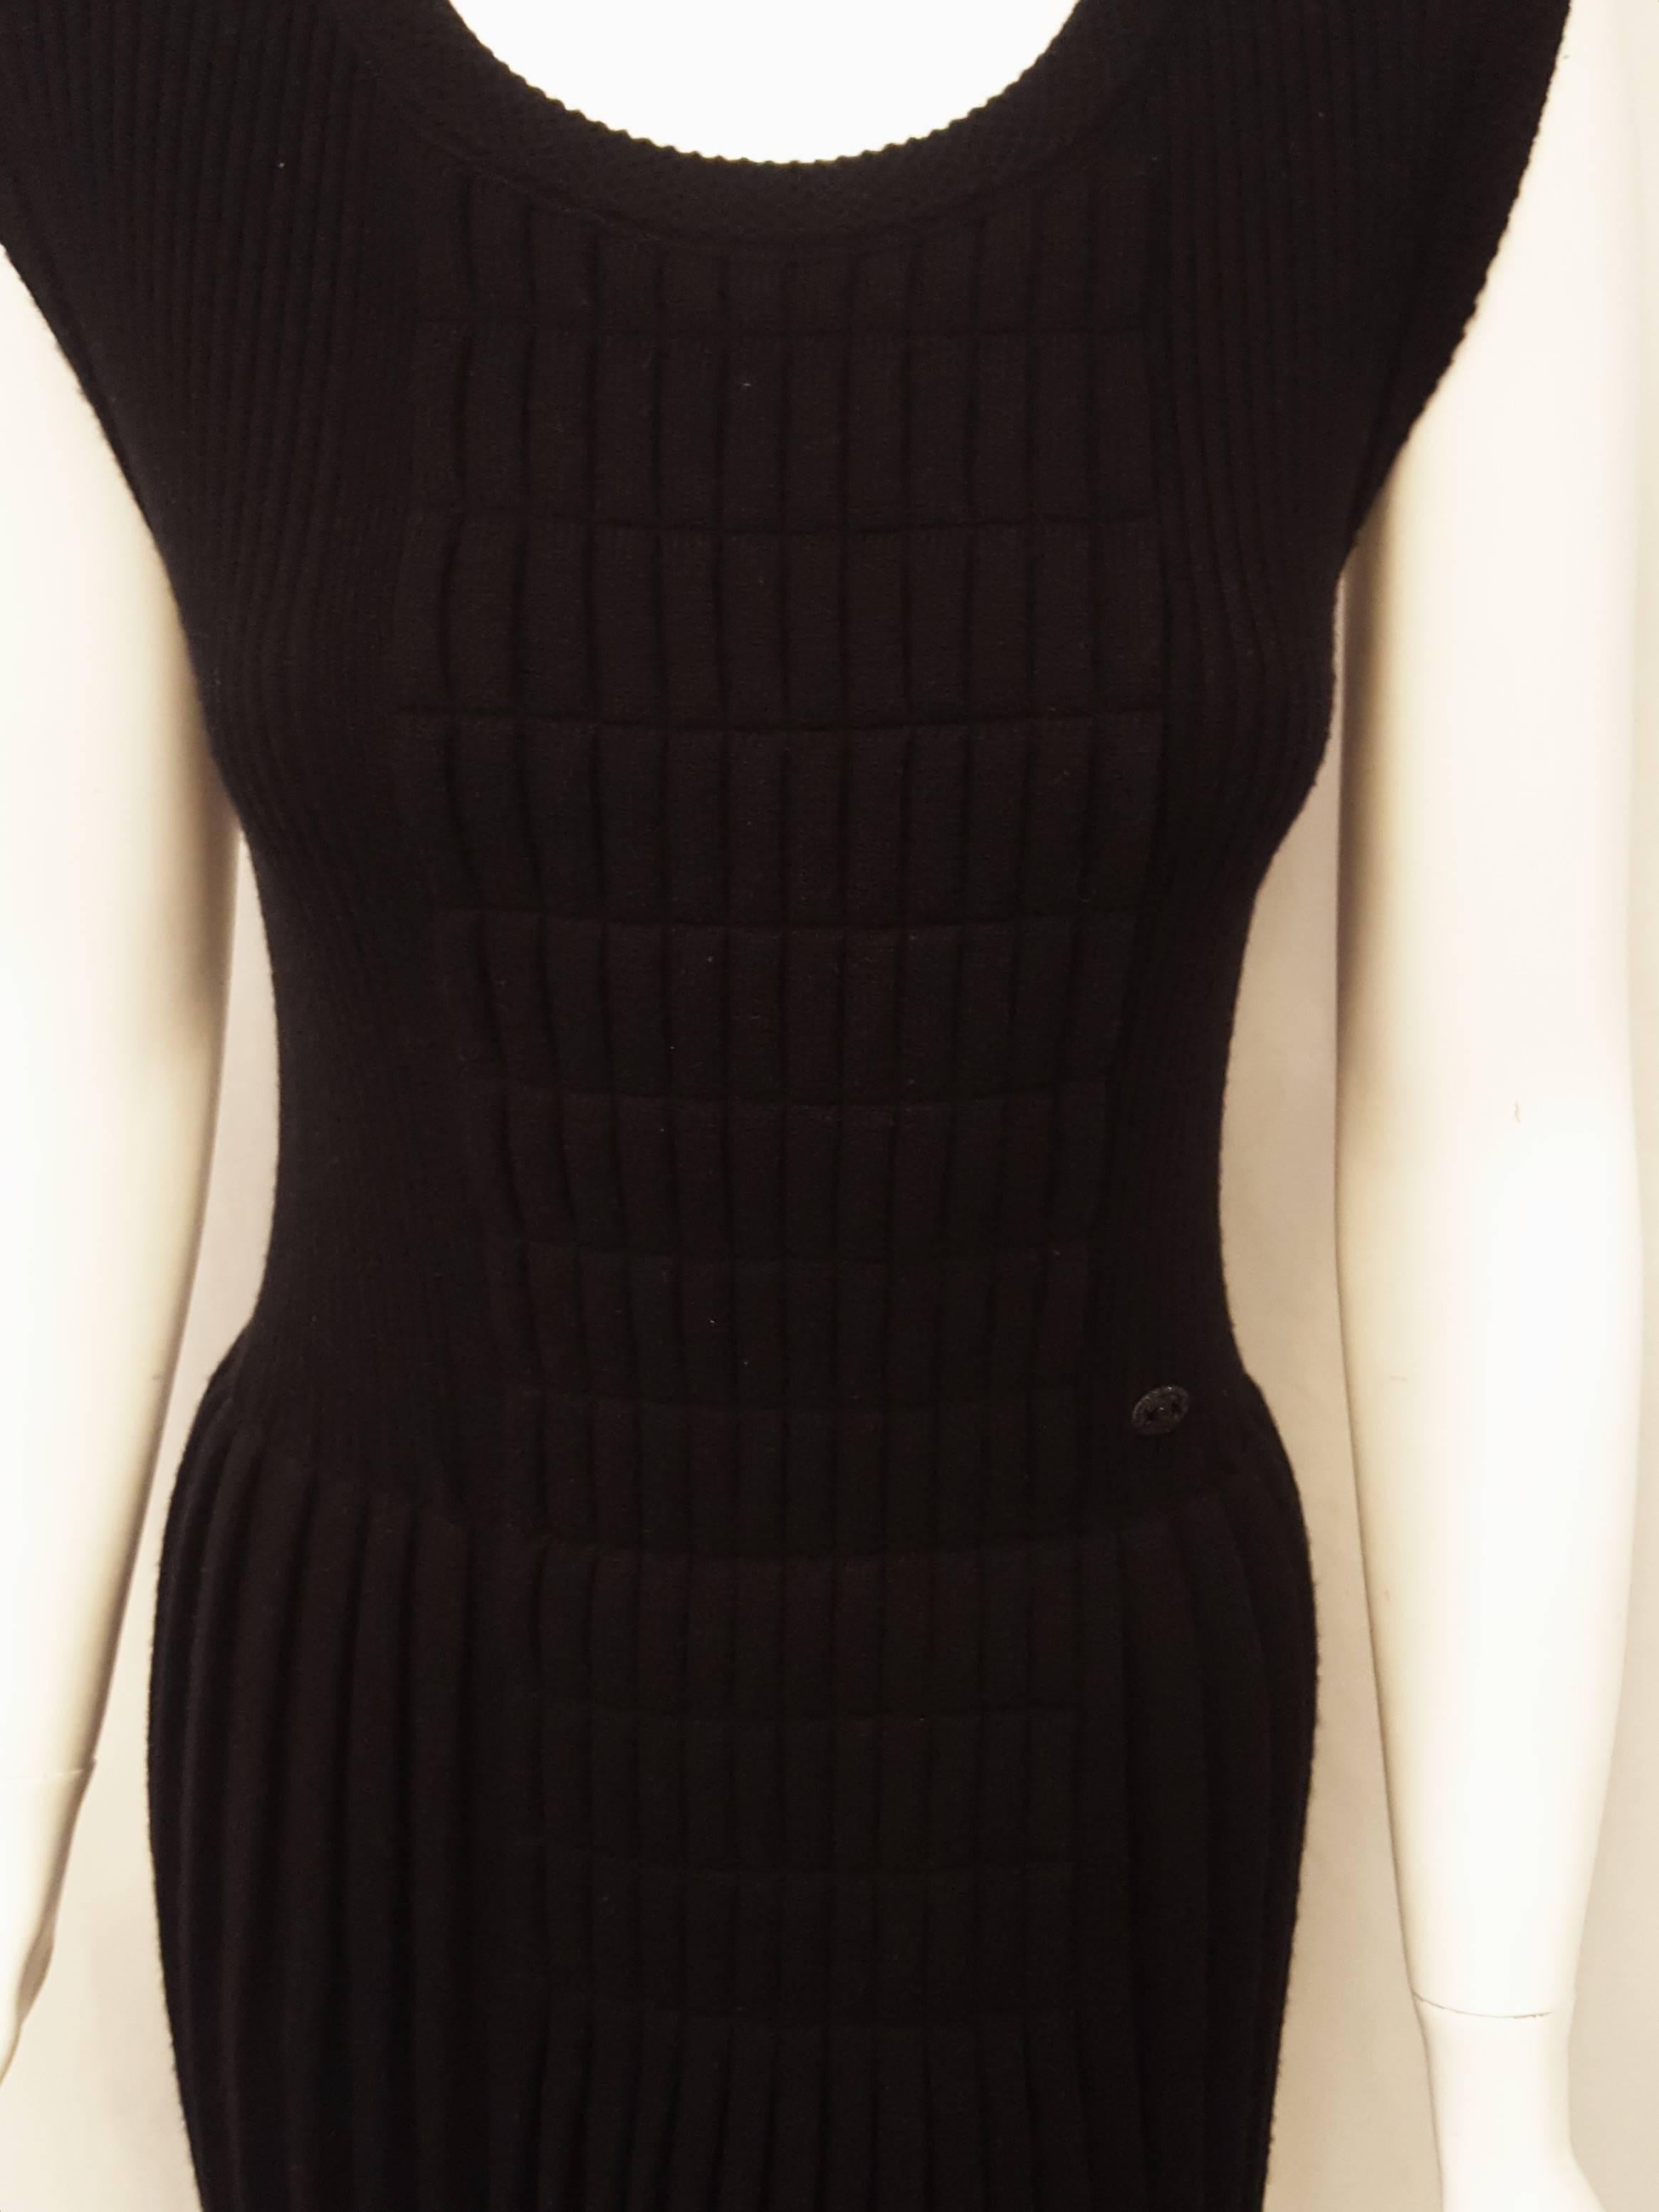 Chanel Black Wool Dress with Pleated Skirt, Fall 2007 Collection  1